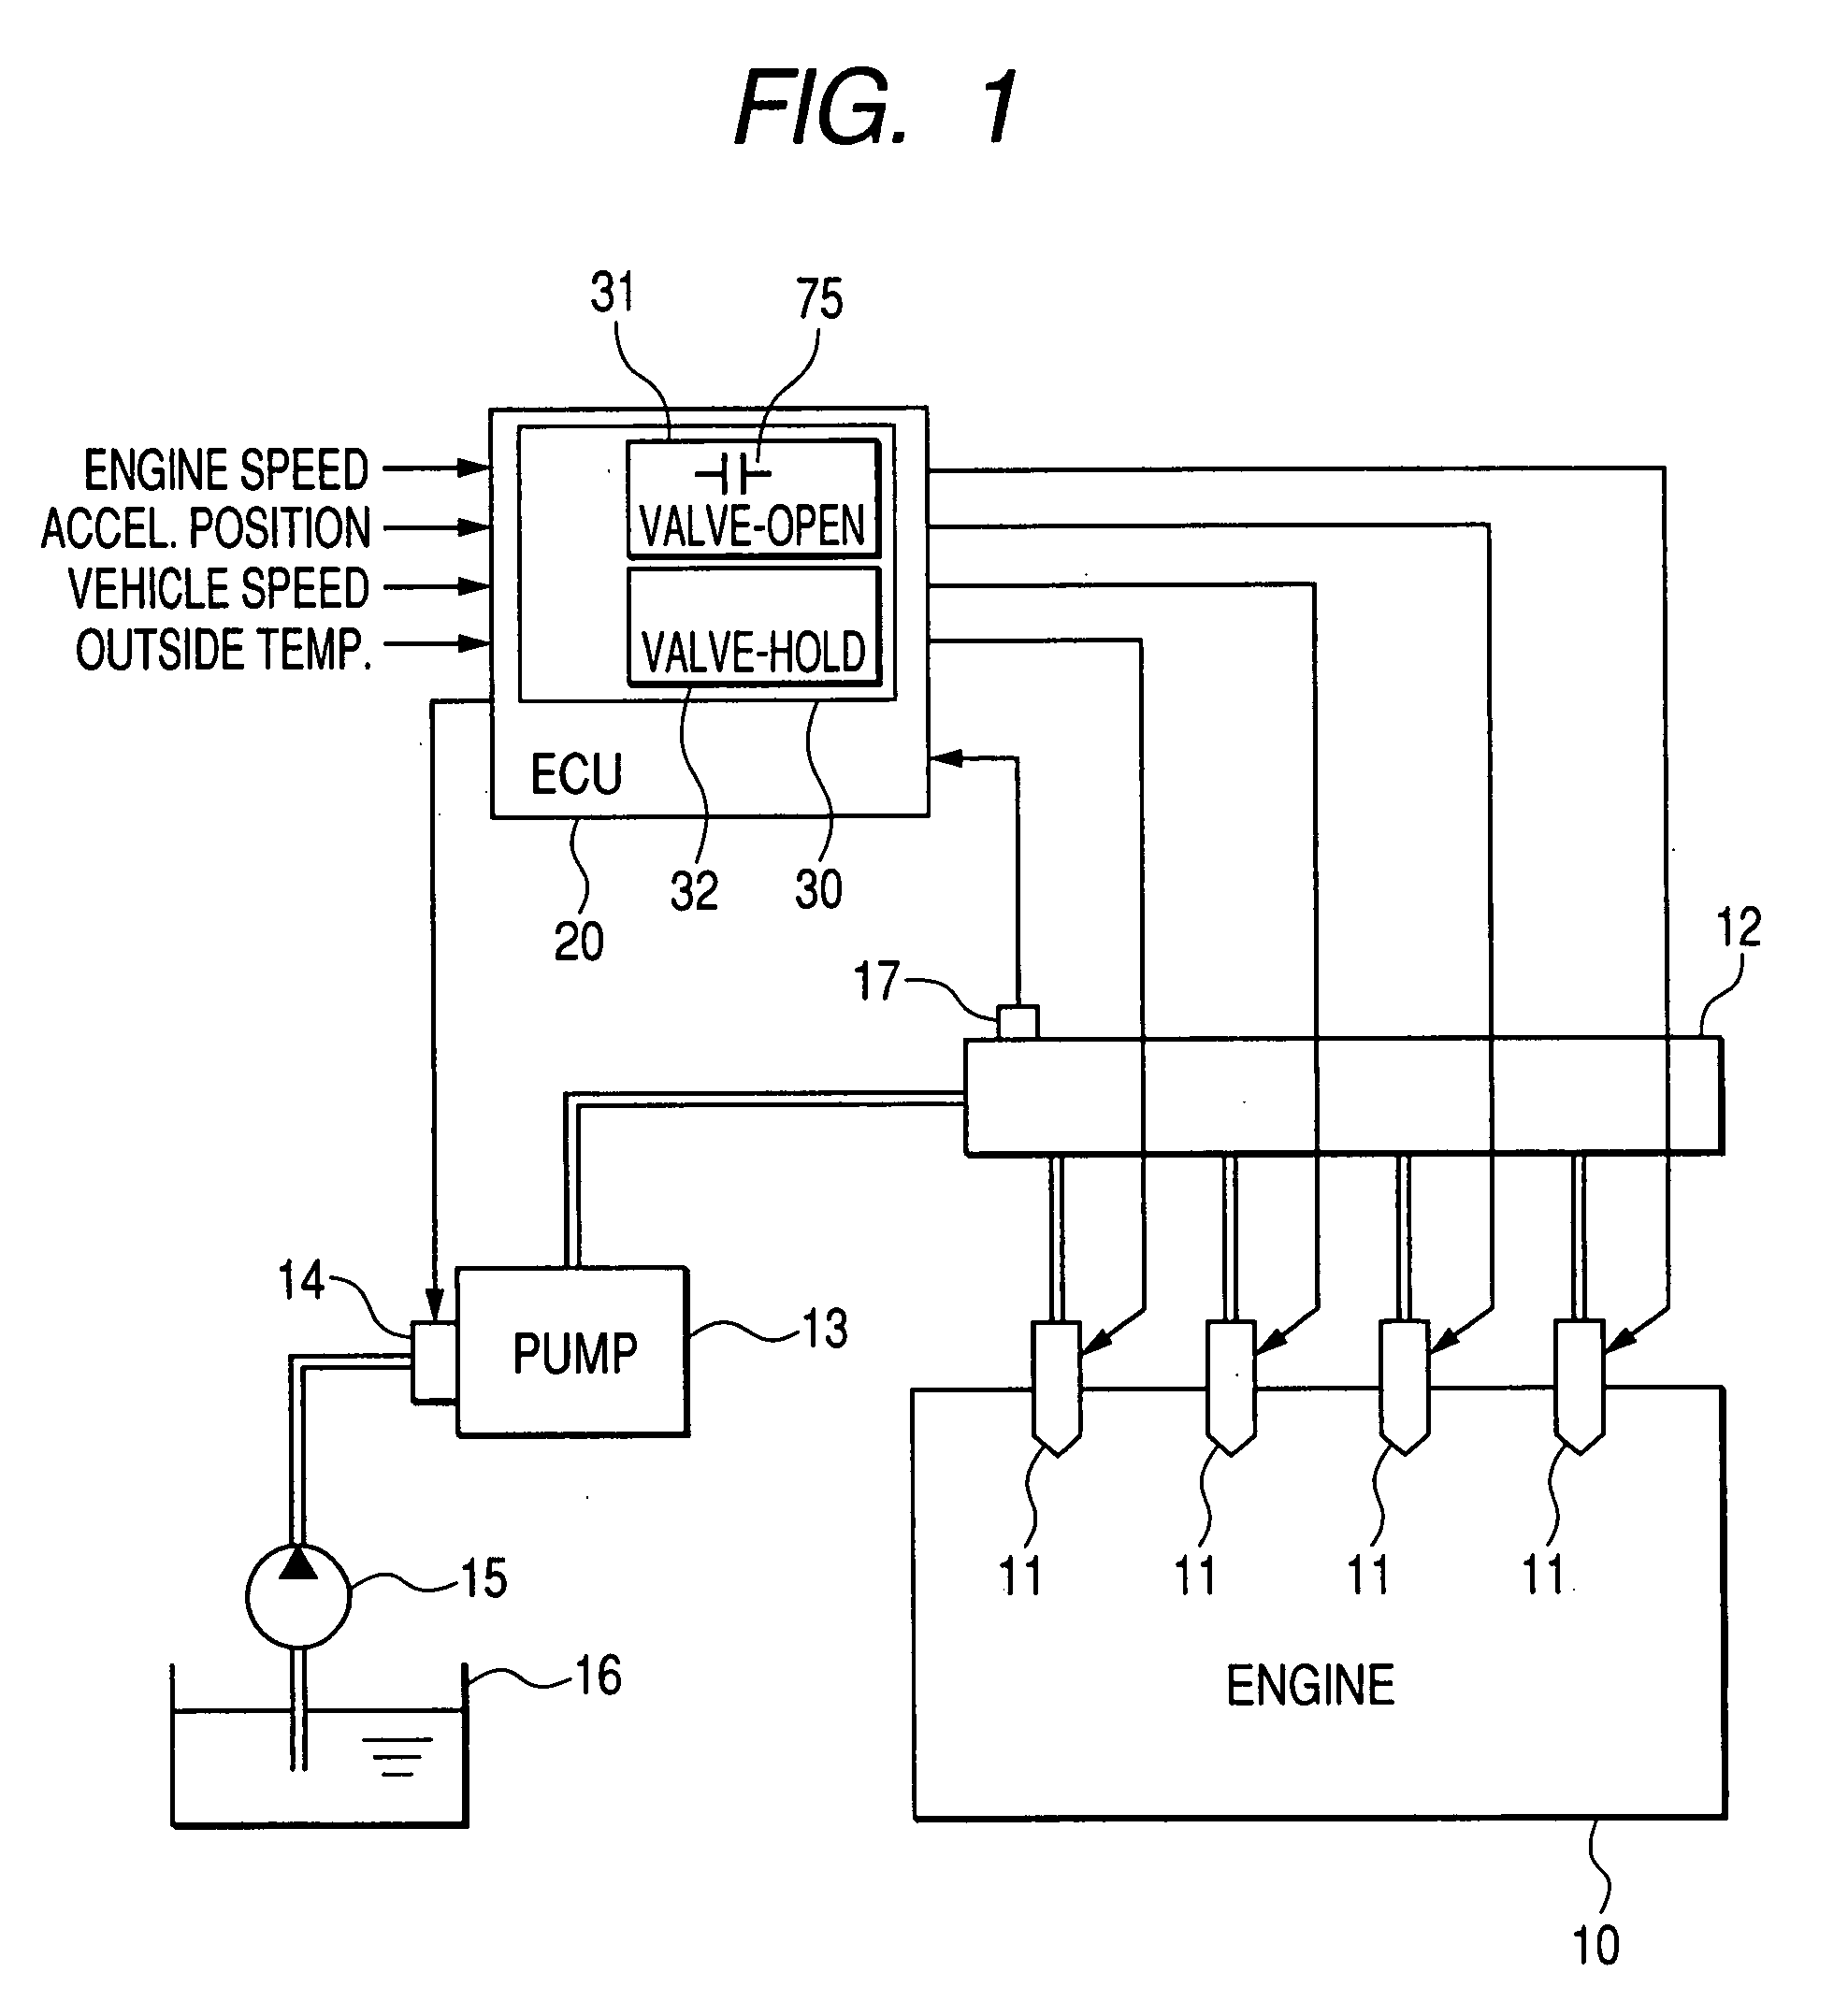 Fuel injection control apparatus designed to minimize combustion noise of engine